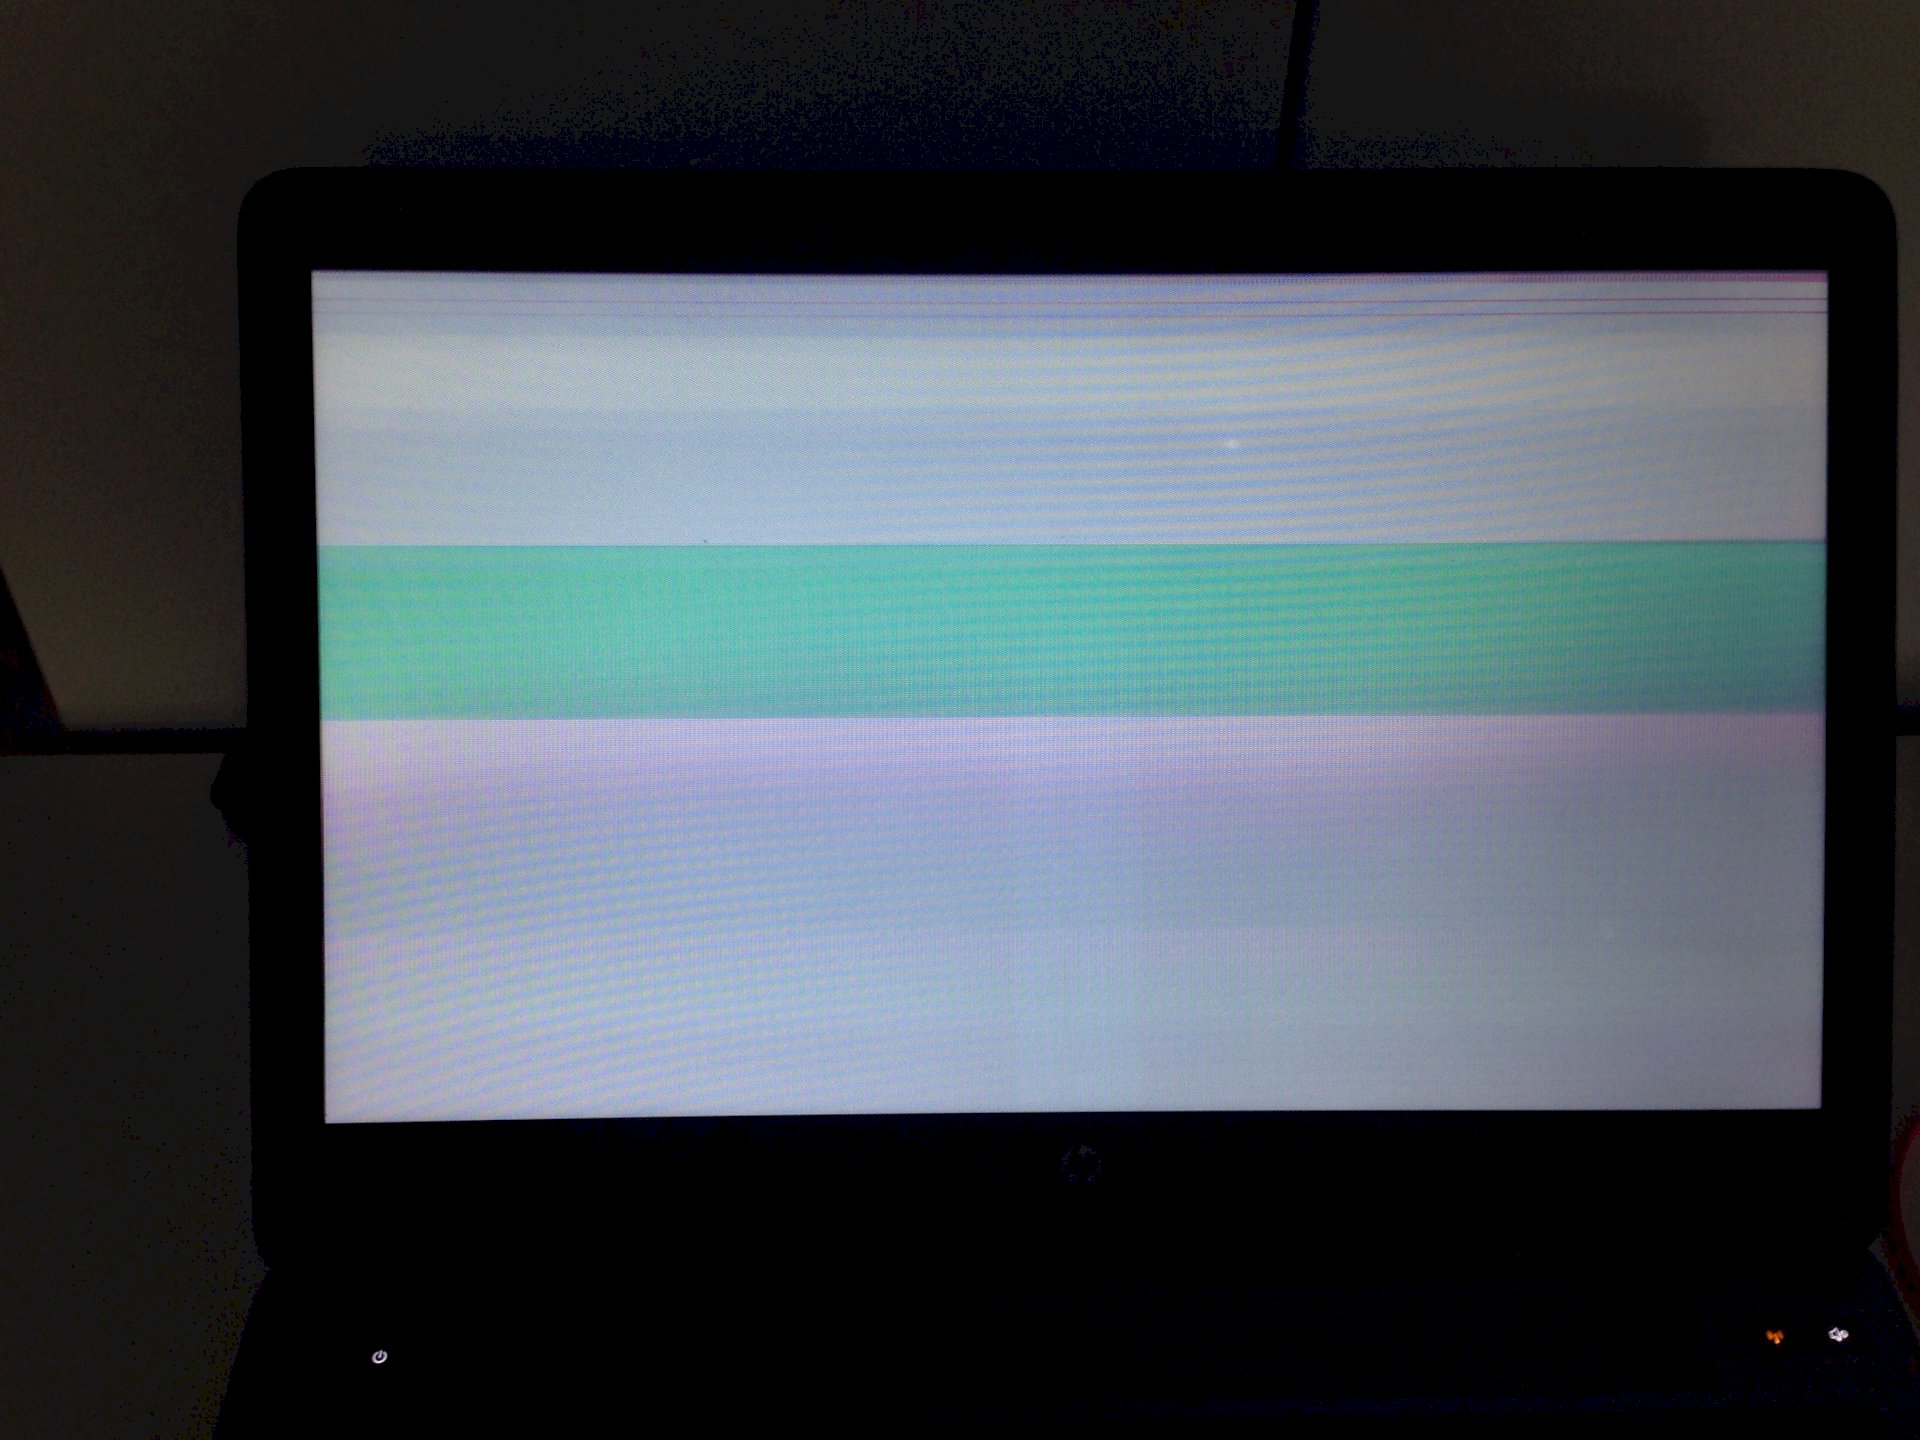 HP laptop screen flickers. What to do